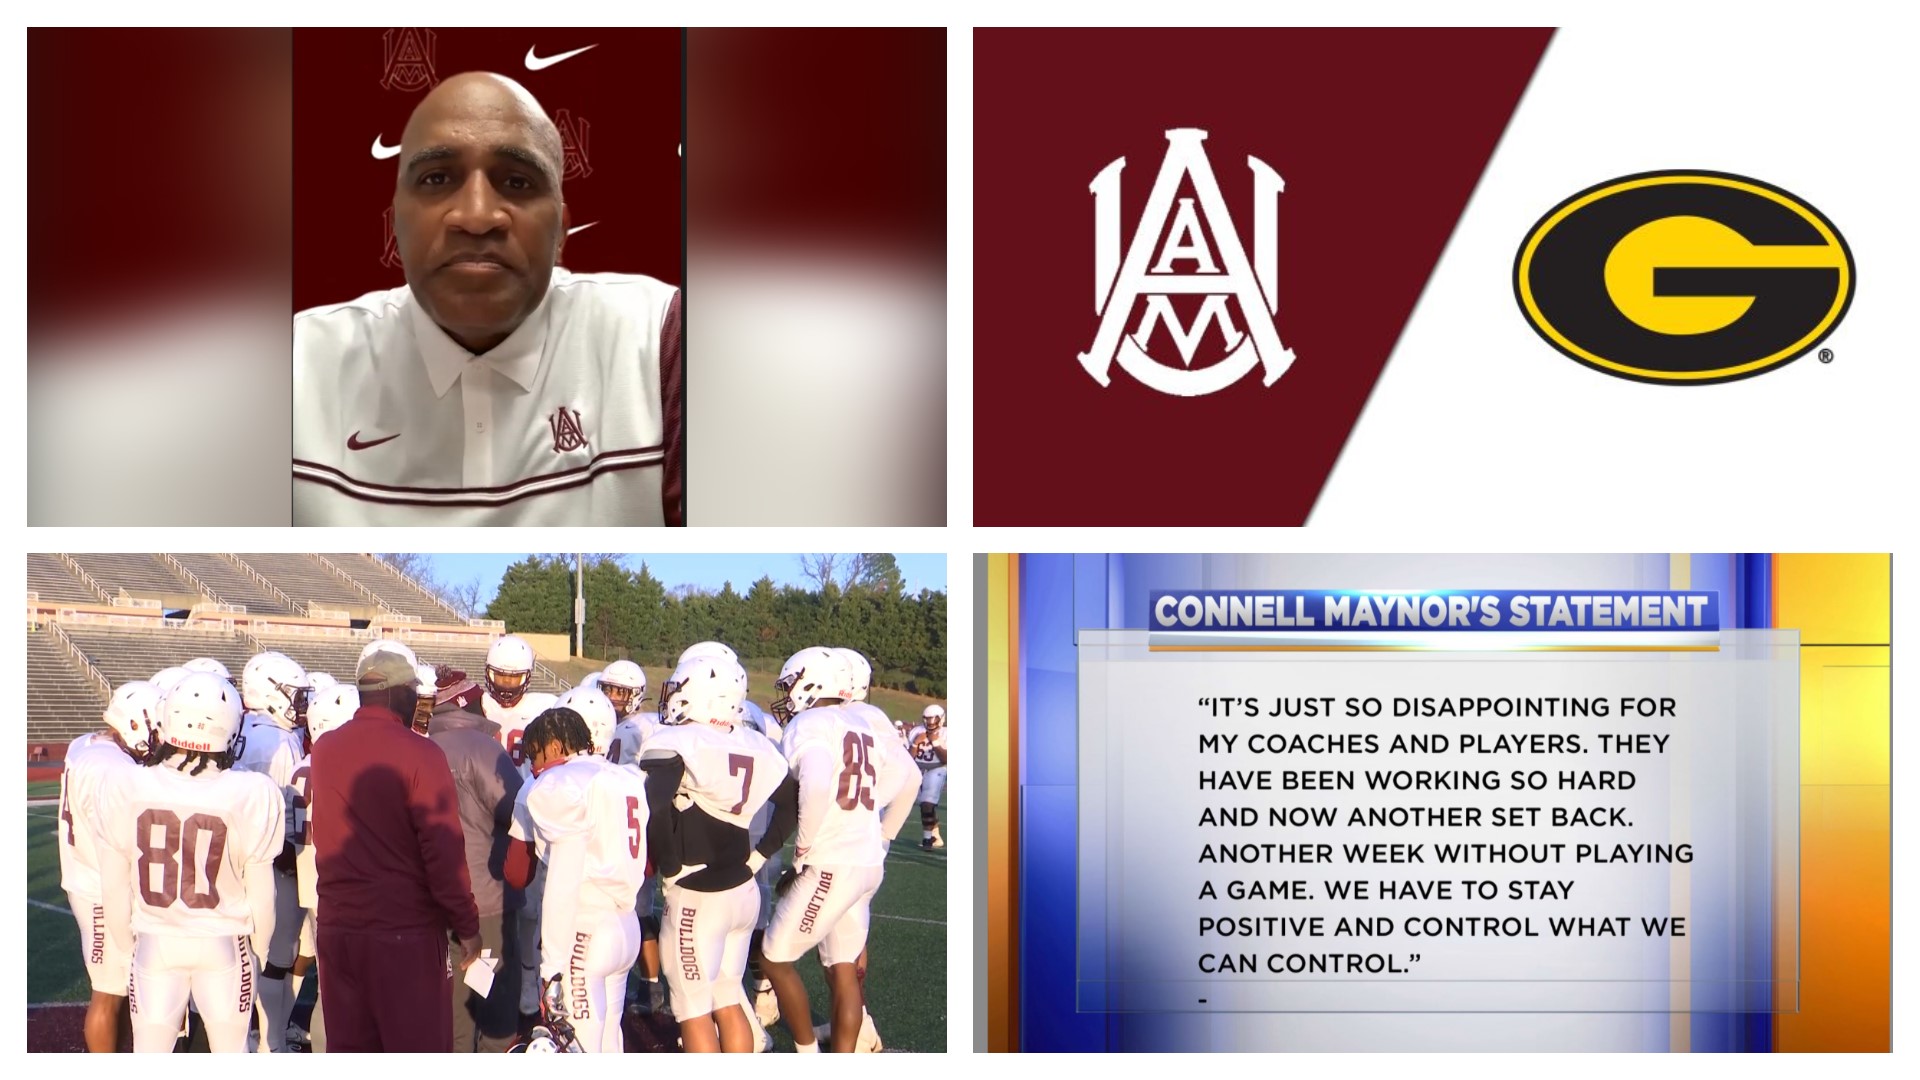 For the 4th time this season, Connell Maynor and the Alabama A&M Bulldogs will not face a SWAC opponent due to Covid-19 issues.